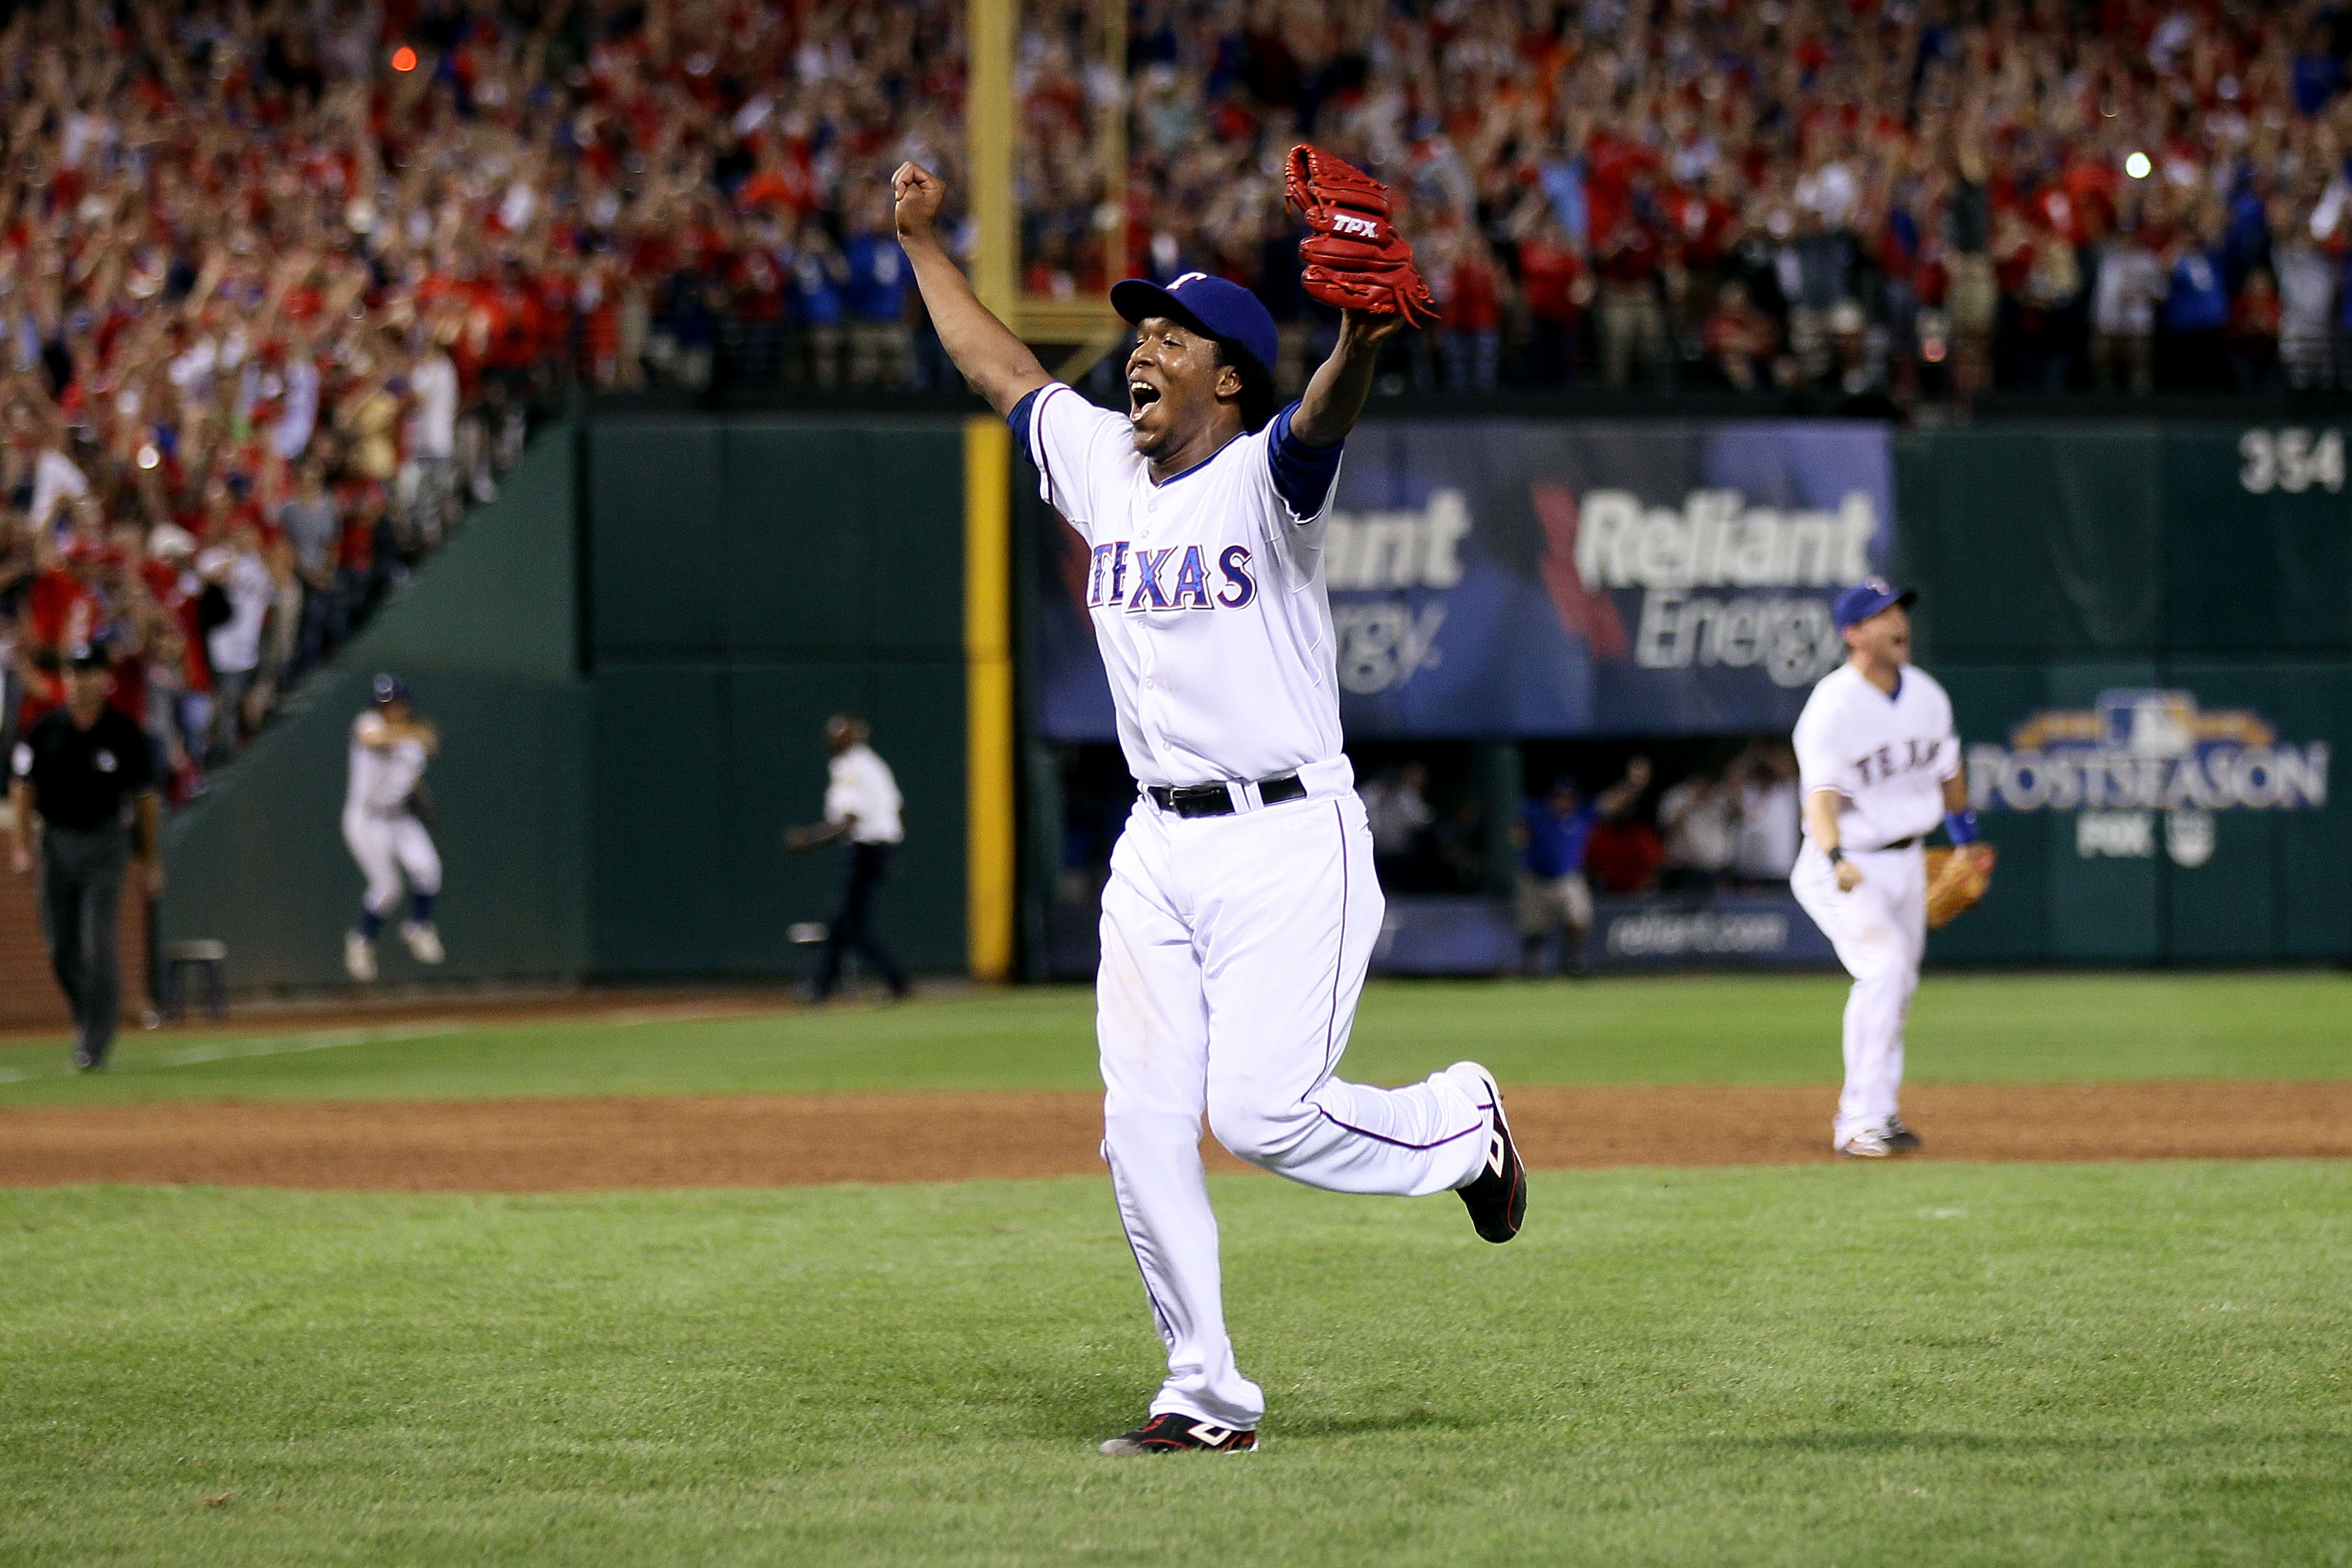 ARLINGTON, TX - OCTOBER 22:  Neftali Feliz #30 of the Texas Rangers celebrates after defeating the New York Yankees  6-1 in Game Six of the ALCS during the 2010 MLB Playoffs at Rangers Ballpark in Arlington on October 22, 2010 in Arlington, Texas.  (Photo